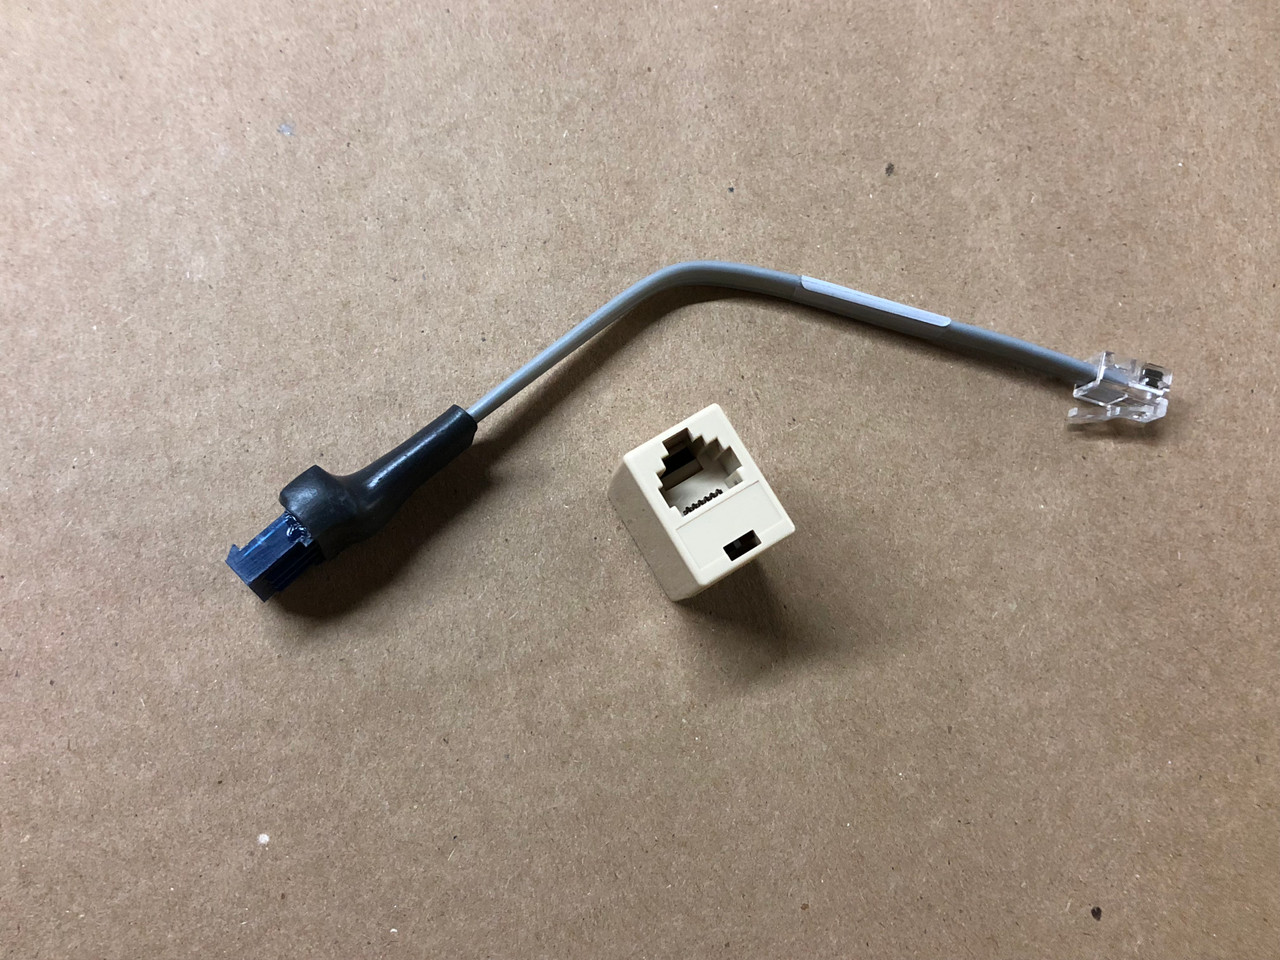 ONE NEW 4 PIN SOCKET CABLE ADAPTER RJ12 MALE PLUG.